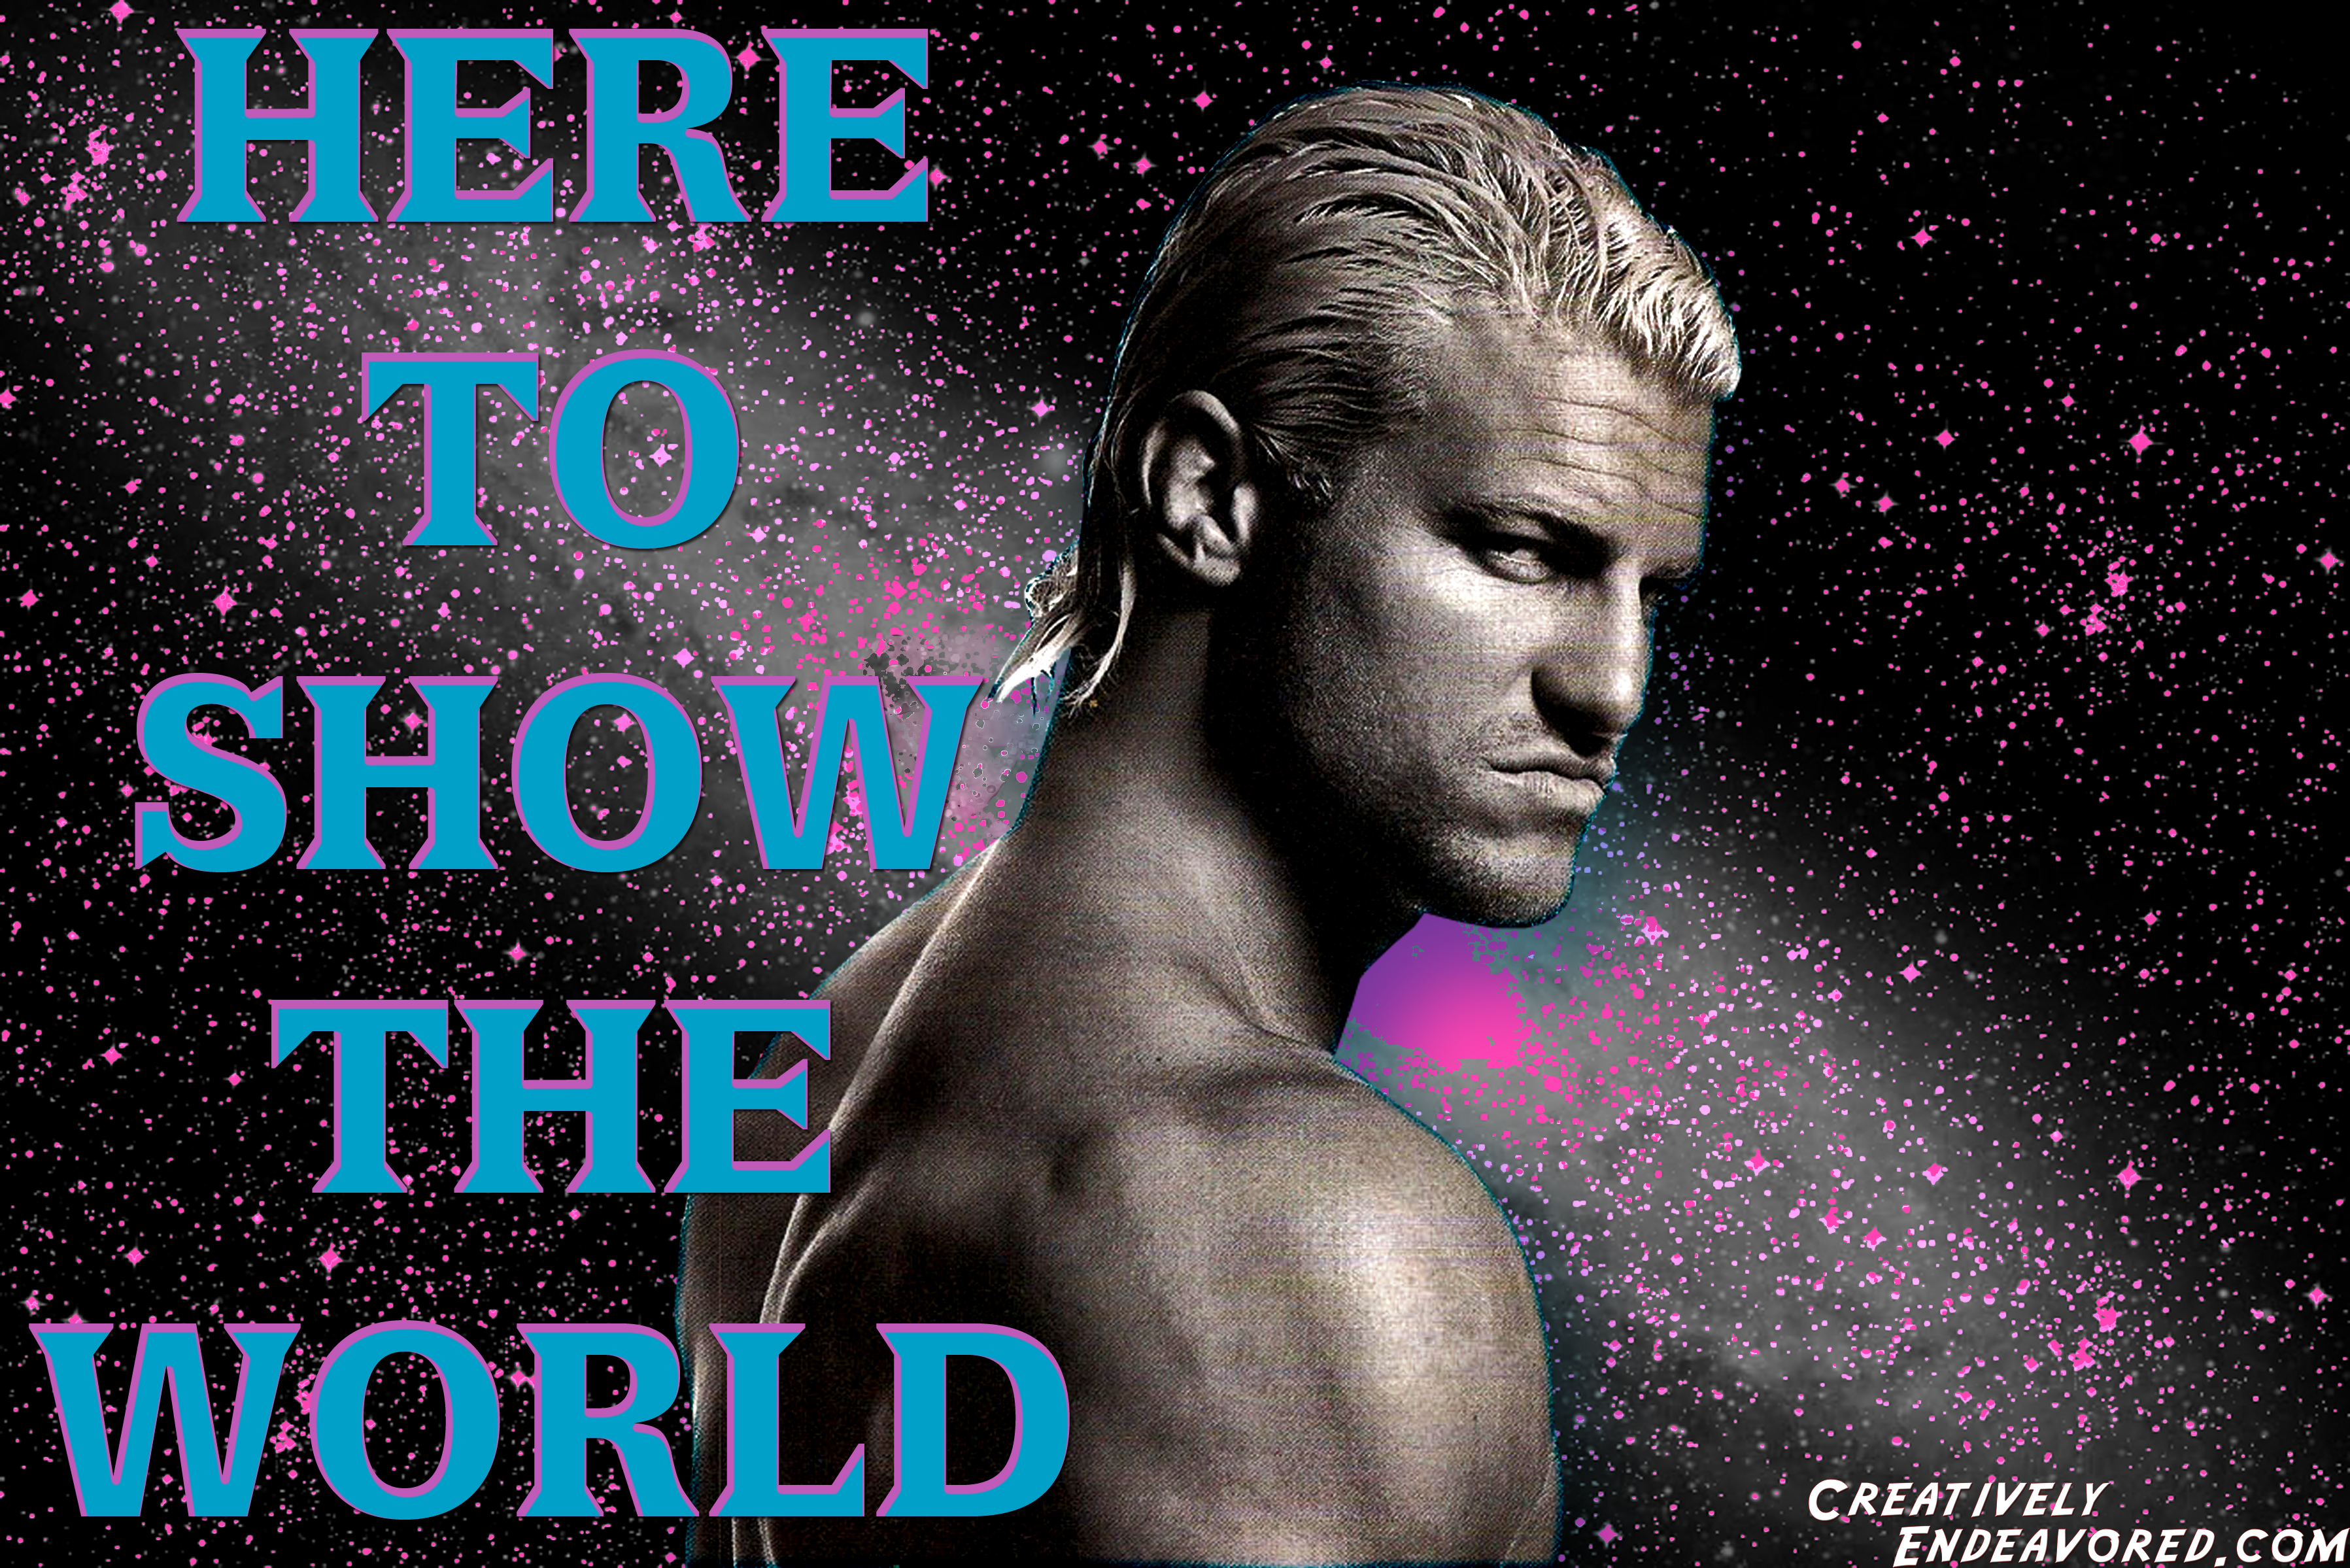 Wallpaper Wednesday Dolph Ziggler Here To Show The World